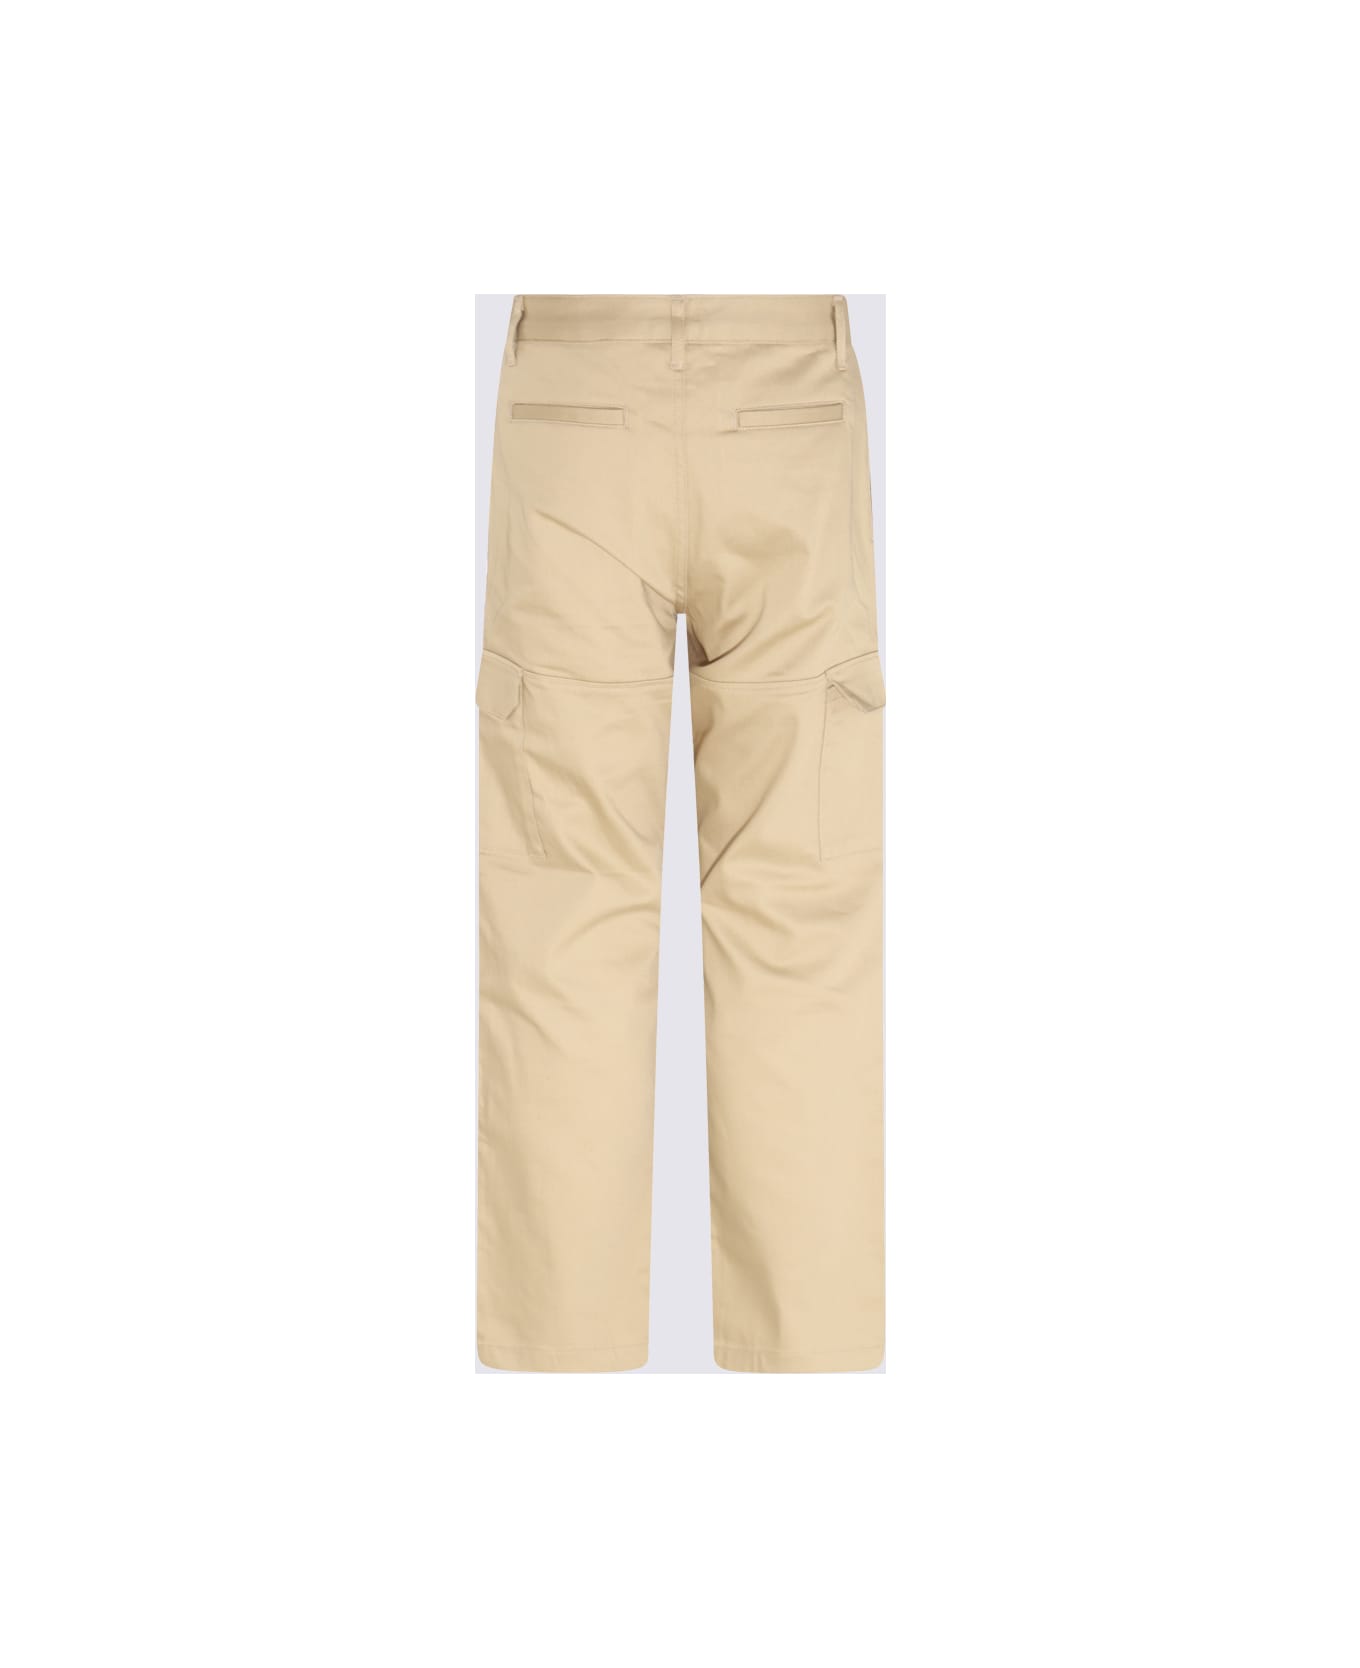 Daily Paper Beige Cotton Pants - TWILL BEIGE ボトムス